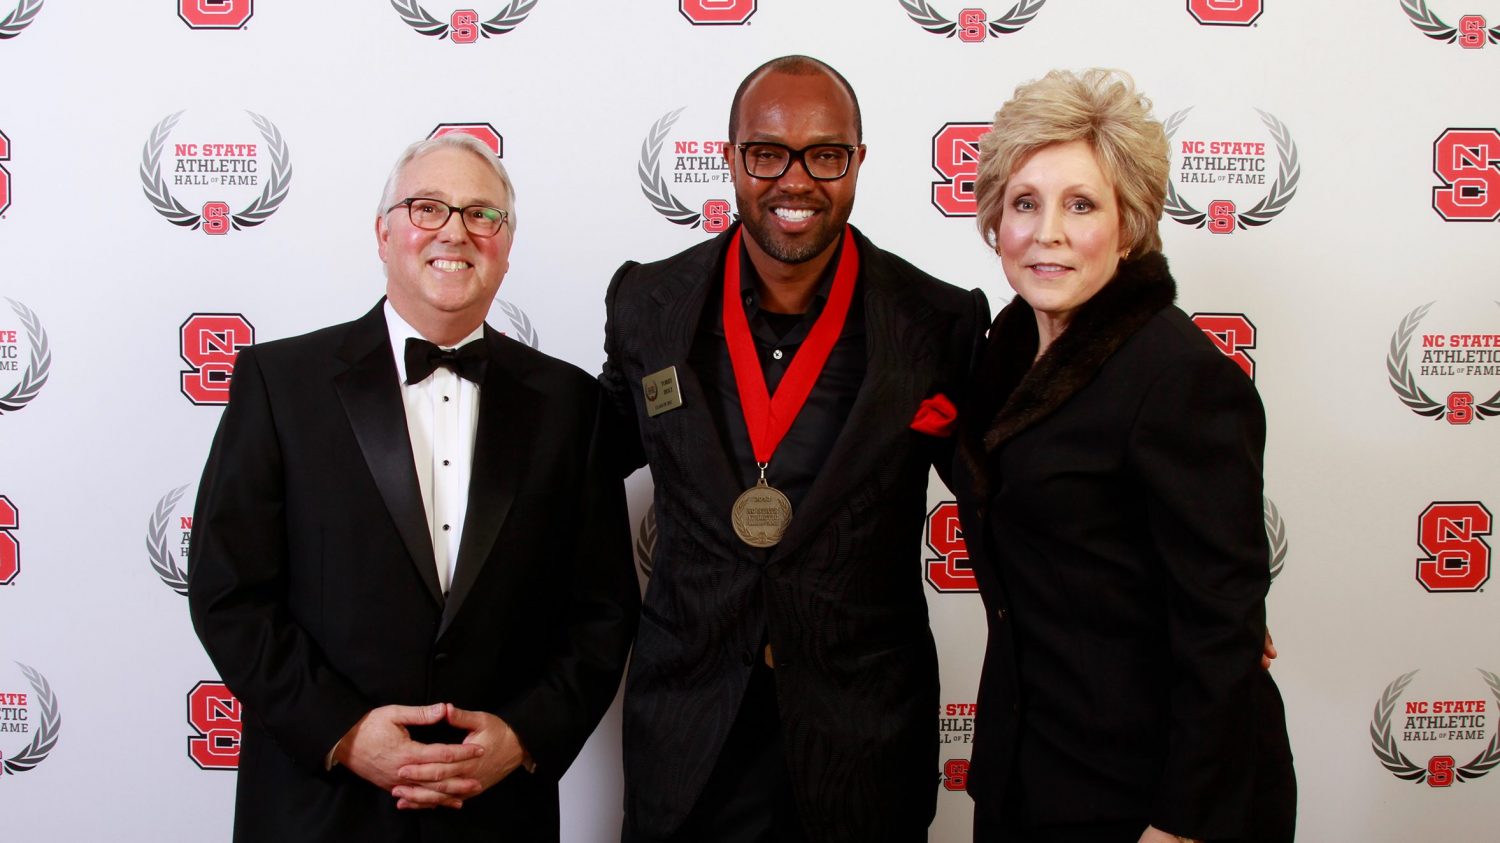 Torry Holt with Chancellor Woodson and Debbie Yow in 2013